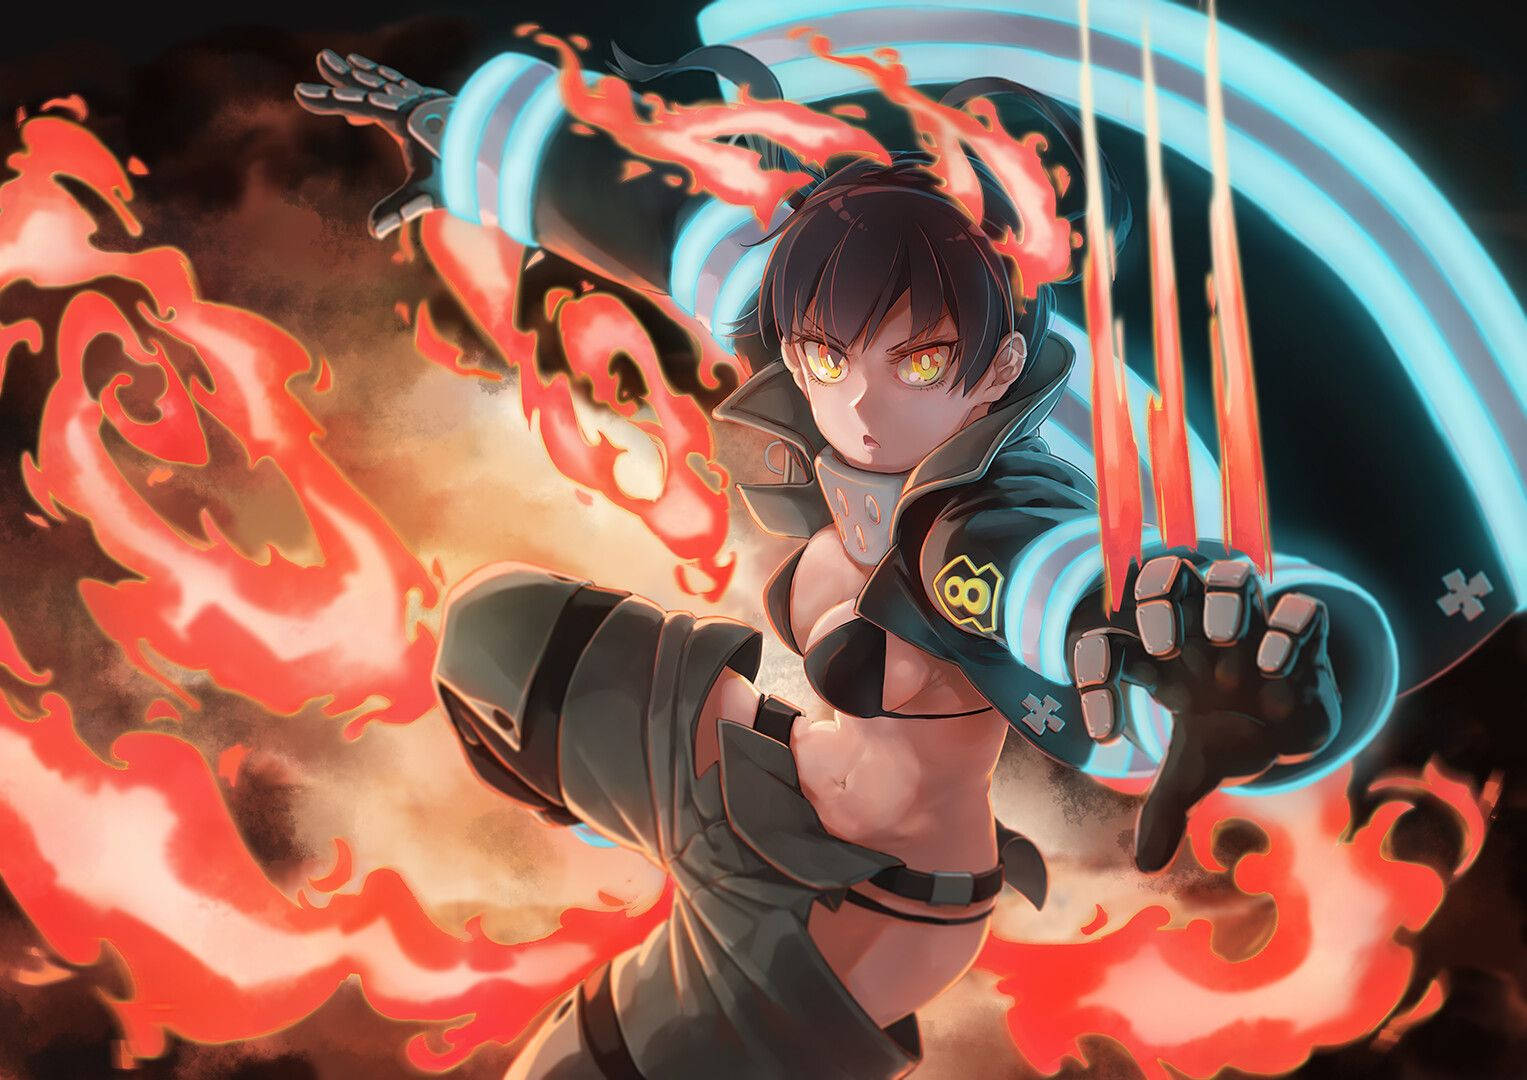 Free Fire Force Wallpaper Downloads, [100+] Fire Force Wallpapers for FREE  